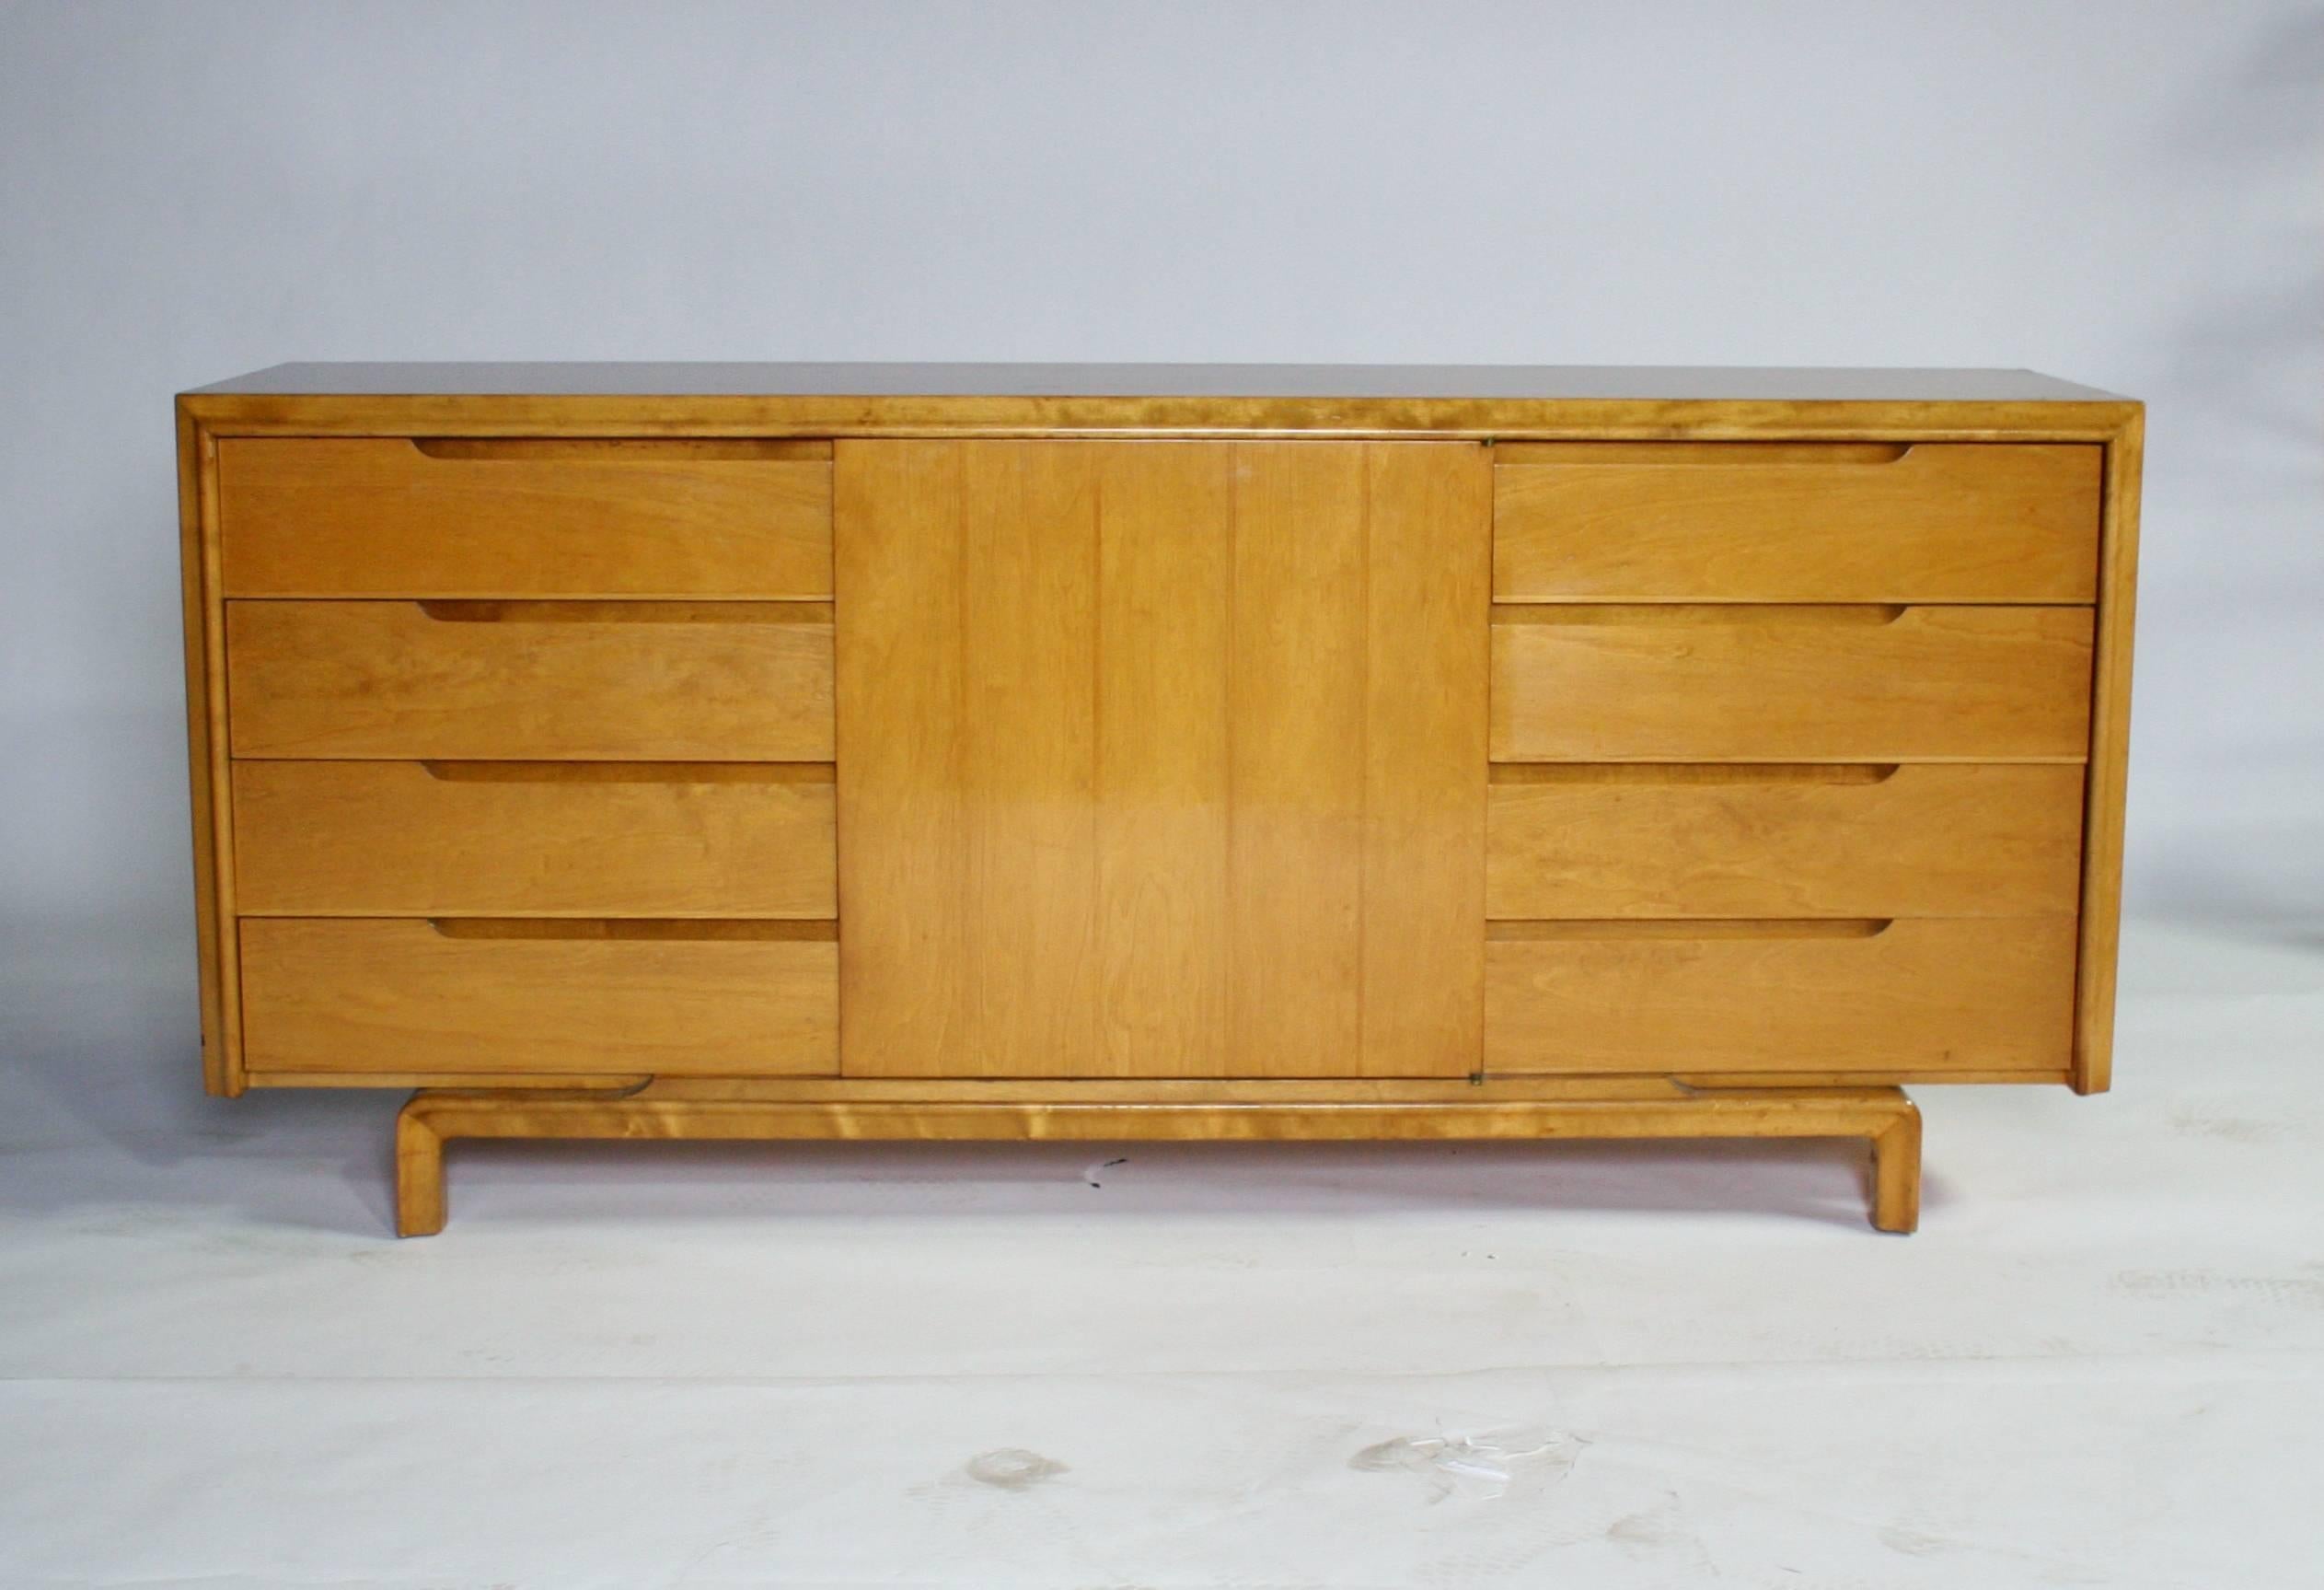 Gorgeous Mid-Century Swedish Modern sideboard made from flamed maple wood by Edmond Spence. Eight pull-out drawers and center concealed shelves with an additional cutlery pull-out drawer make this cabinet a highly versatile credenza dresser or